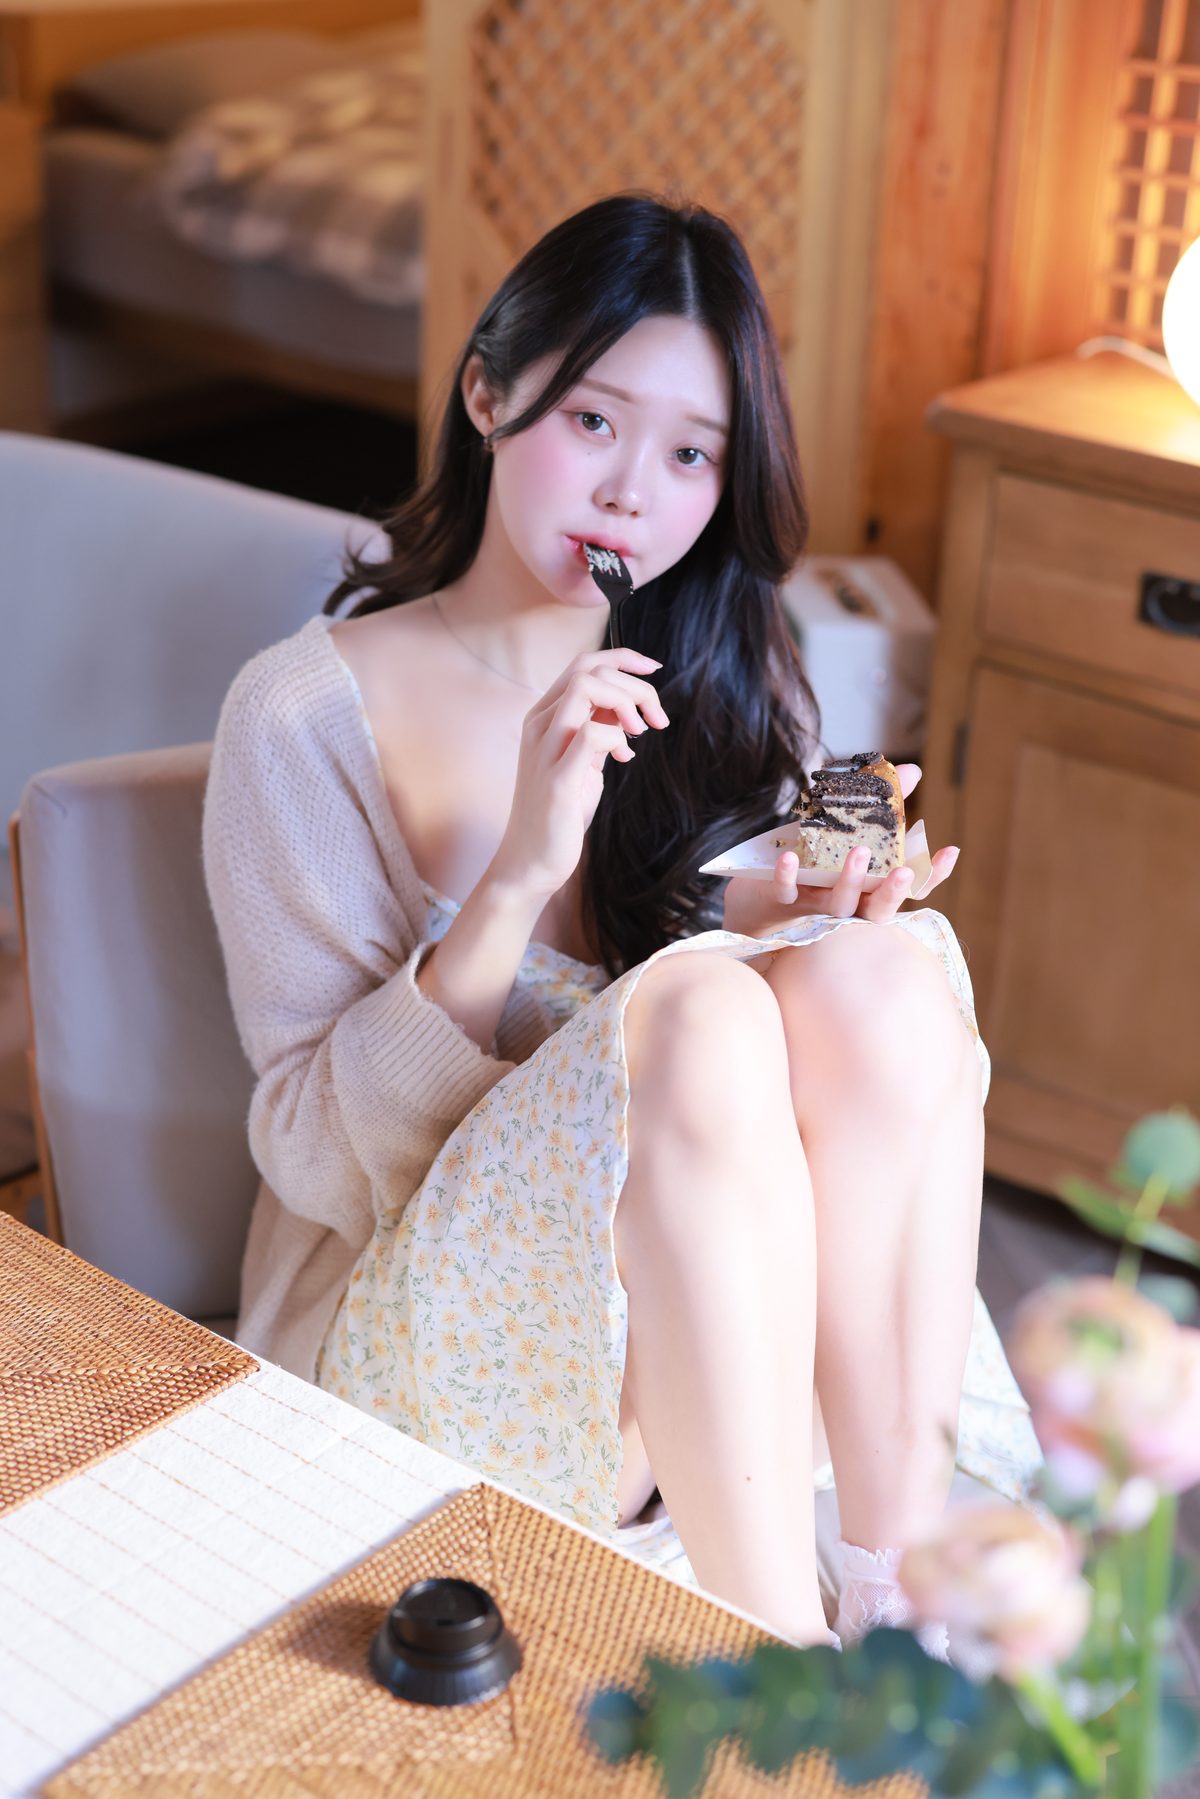 SWEETBOX Inah 이나 SWTB Vol 34 Ive Been Waiting For You 0029 7194453576.jpg